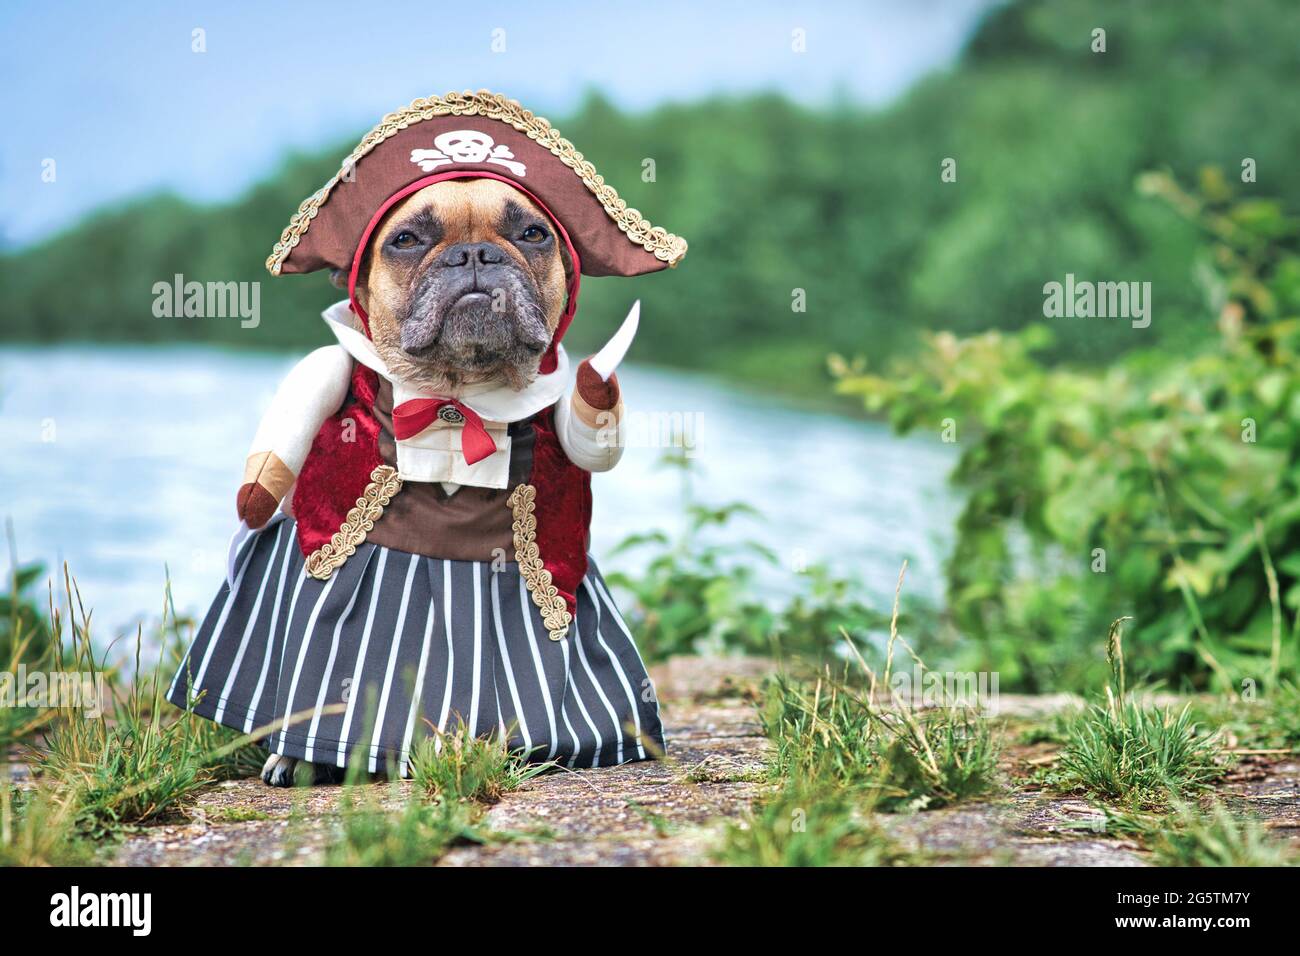 Funny French Bulldog dog  dressed up with pirate bride costume with hat, hook arm and dress standing at waterfront Stock Photo